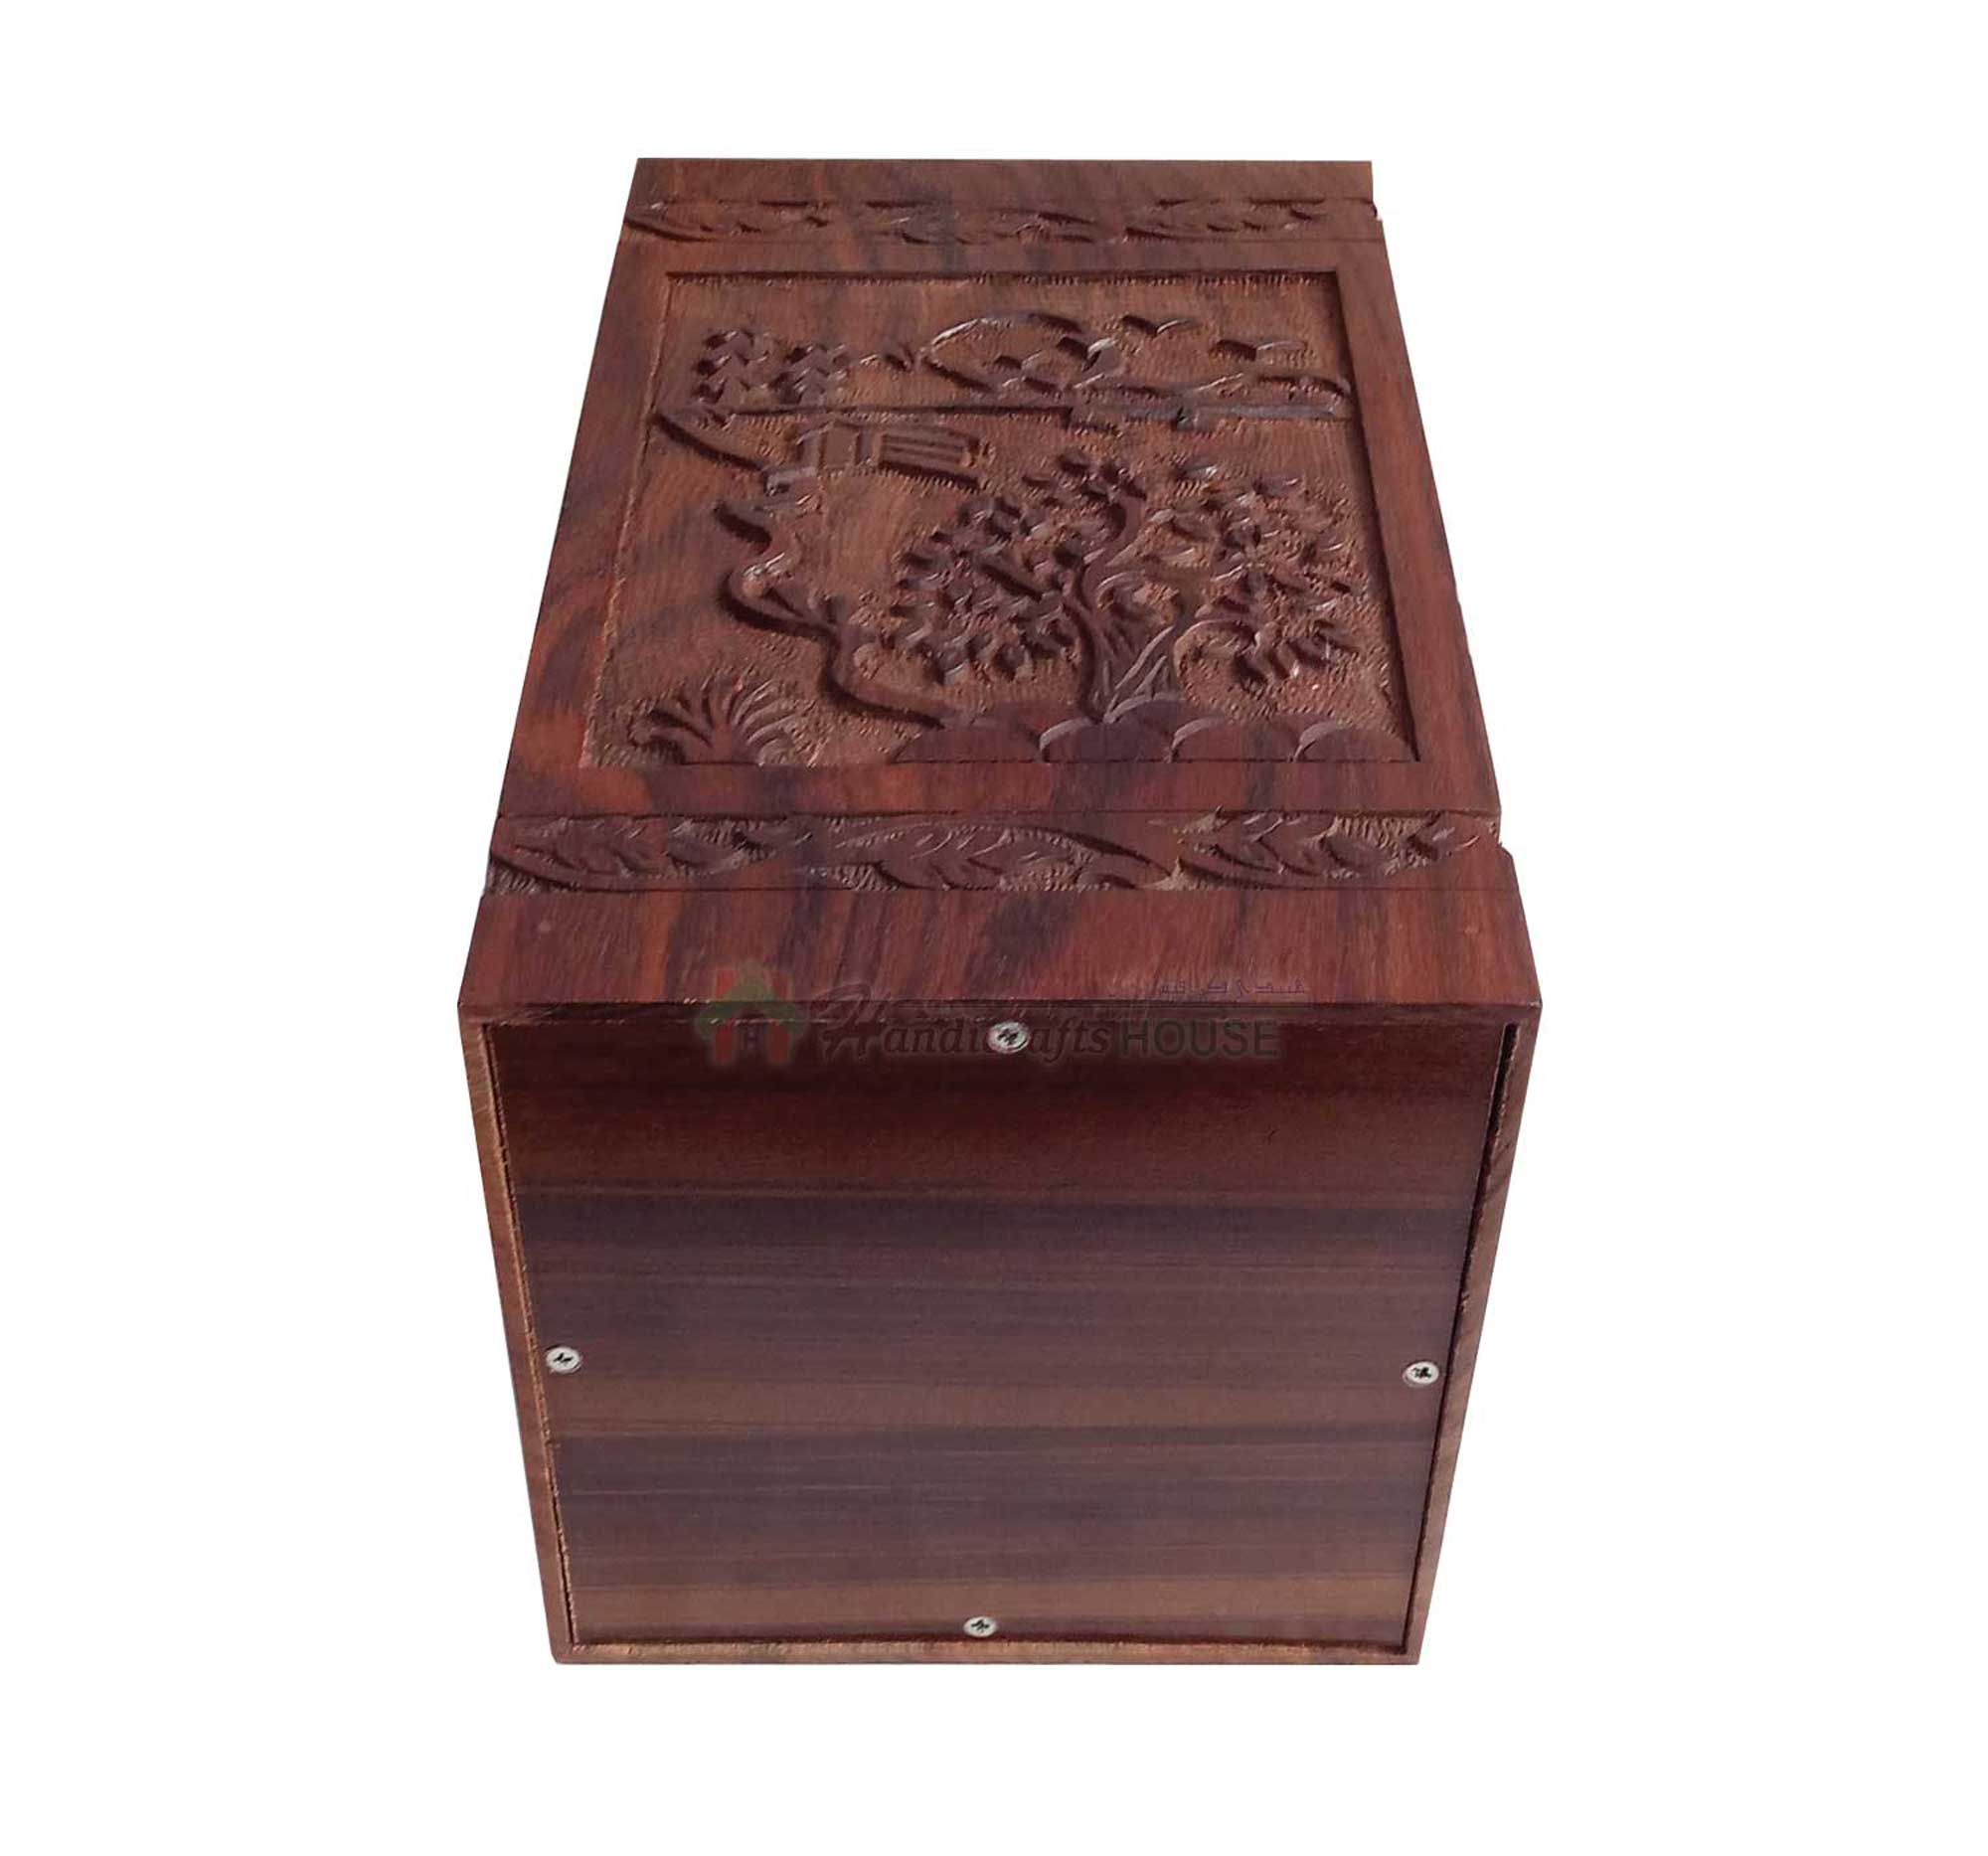 Hands Carving Wooden Cremation Urns, Solid Wood Burial Box for Human or Pet Ashes Adult - Hardwood Memorial Large Urn for Loved One